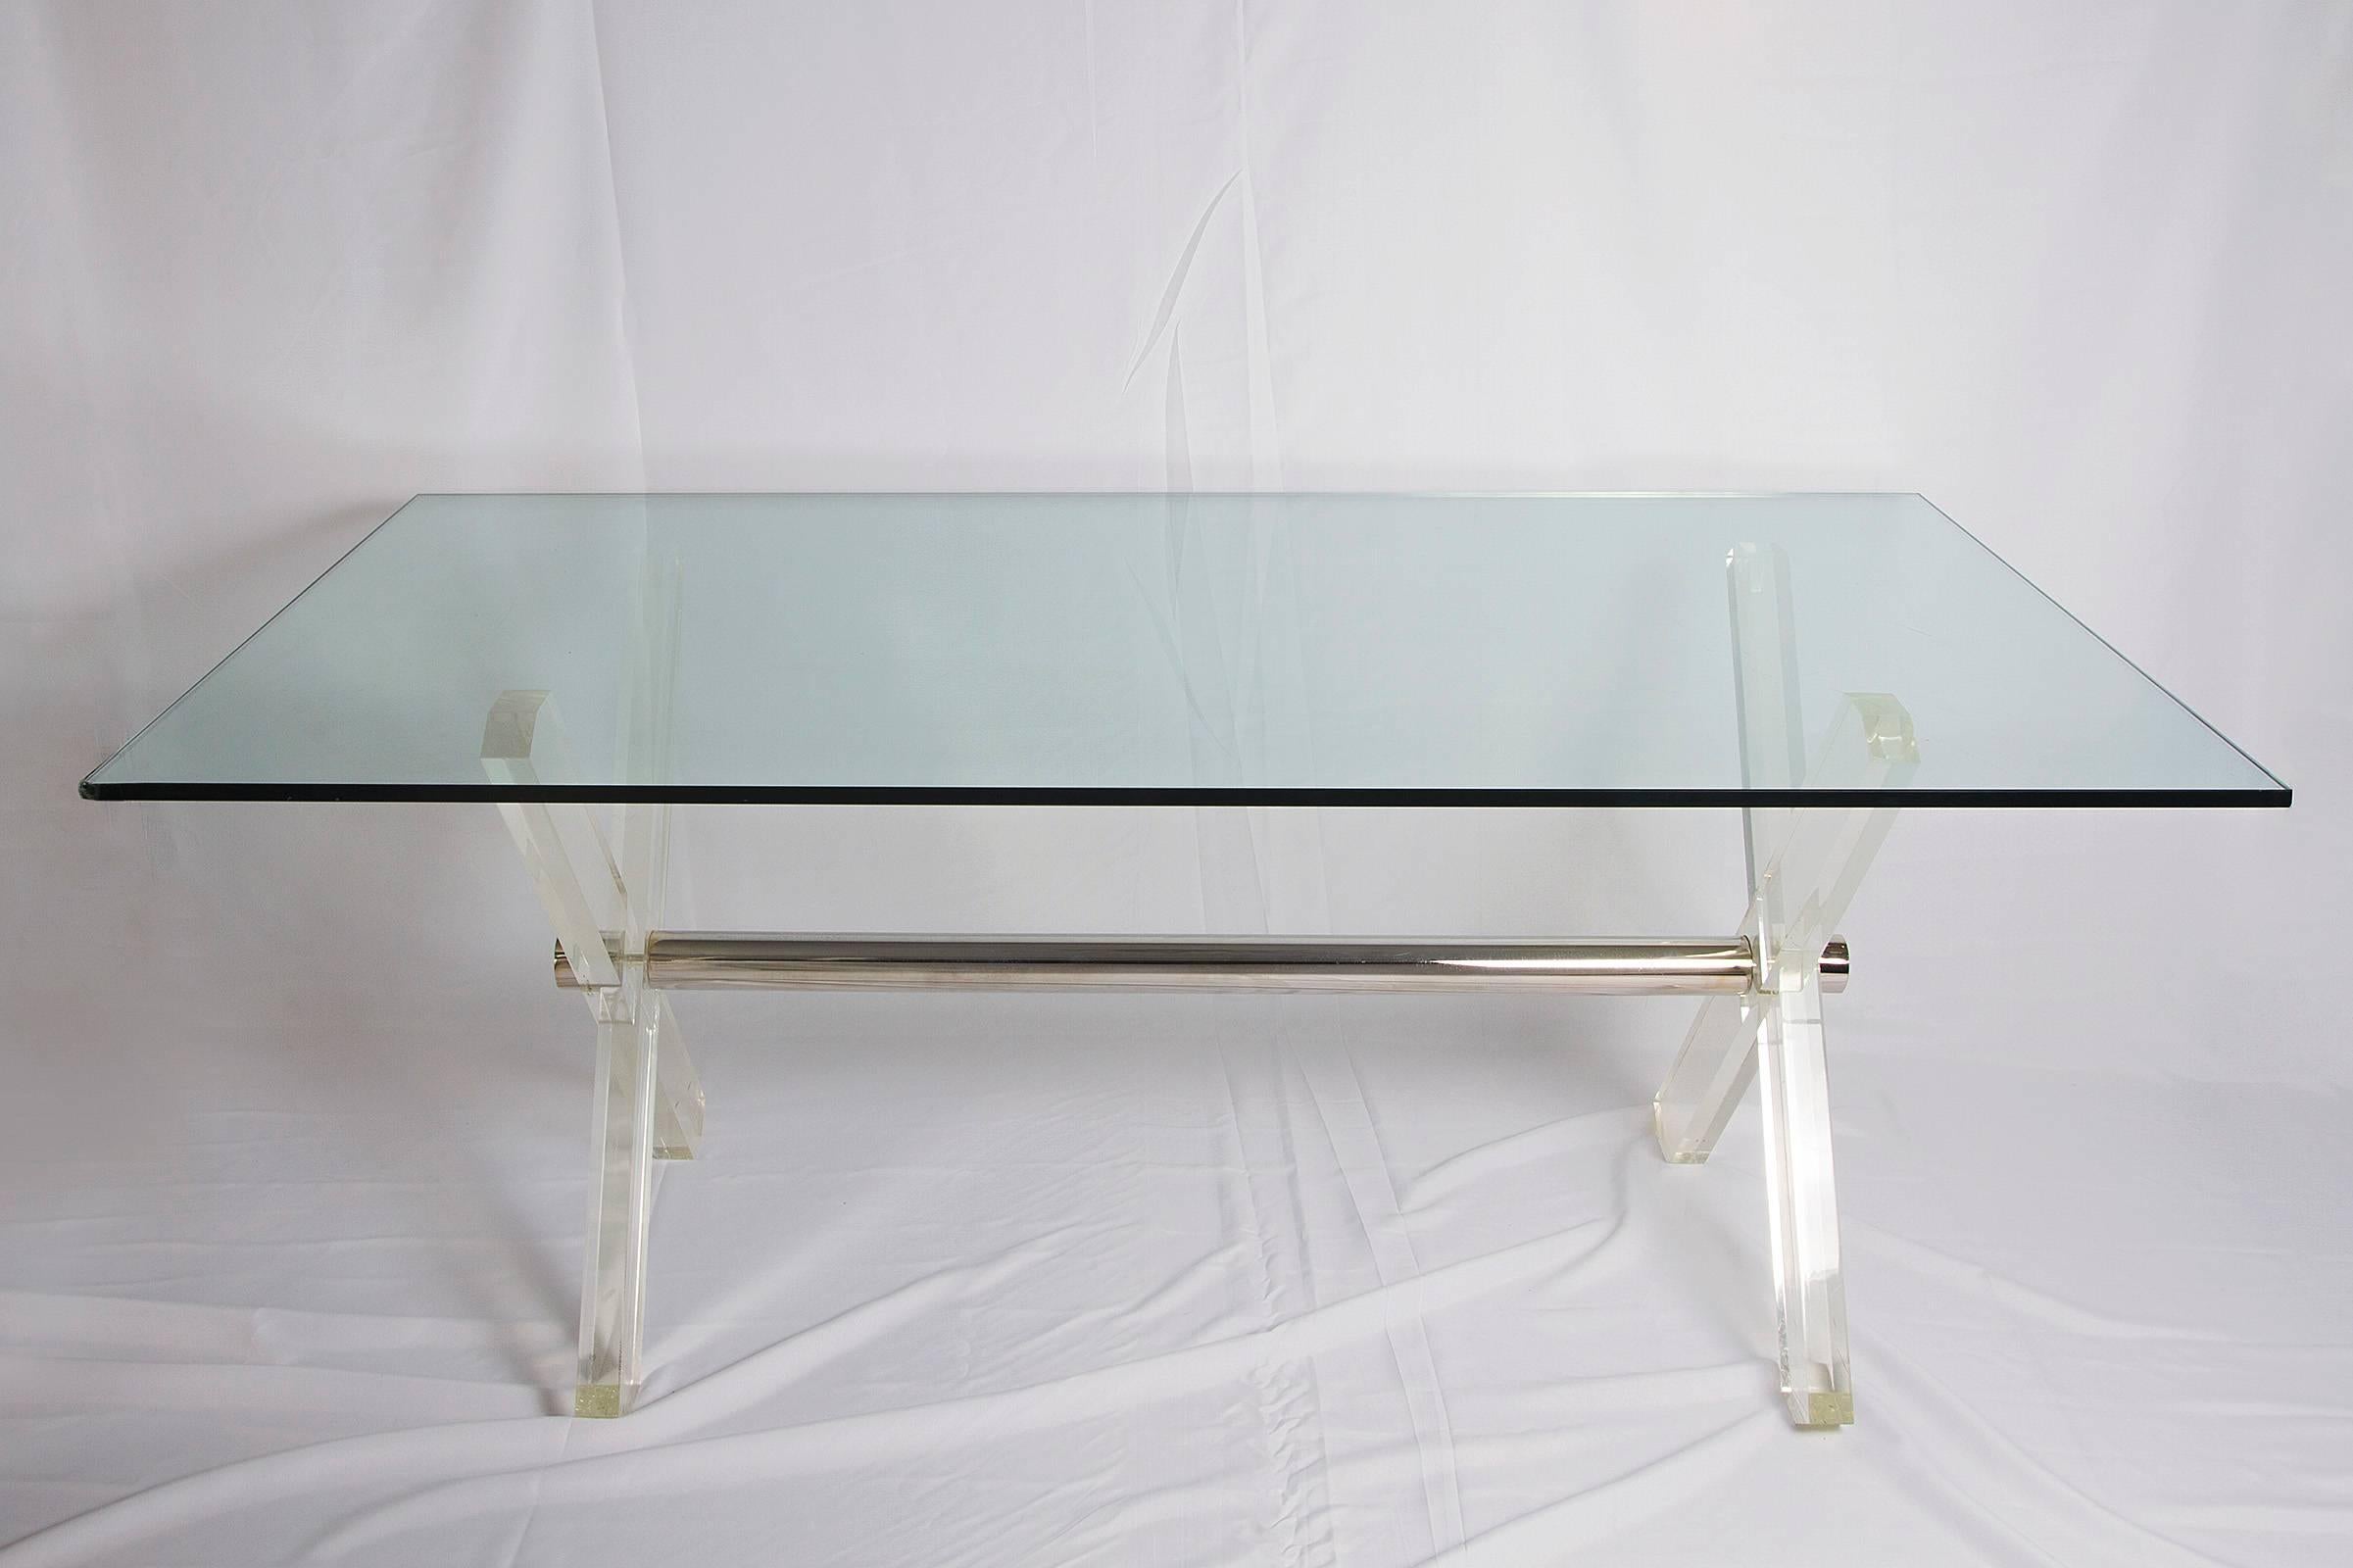 Steel and Lucite X frame dining table, circa 1970s.

Please contact us for delivery details.